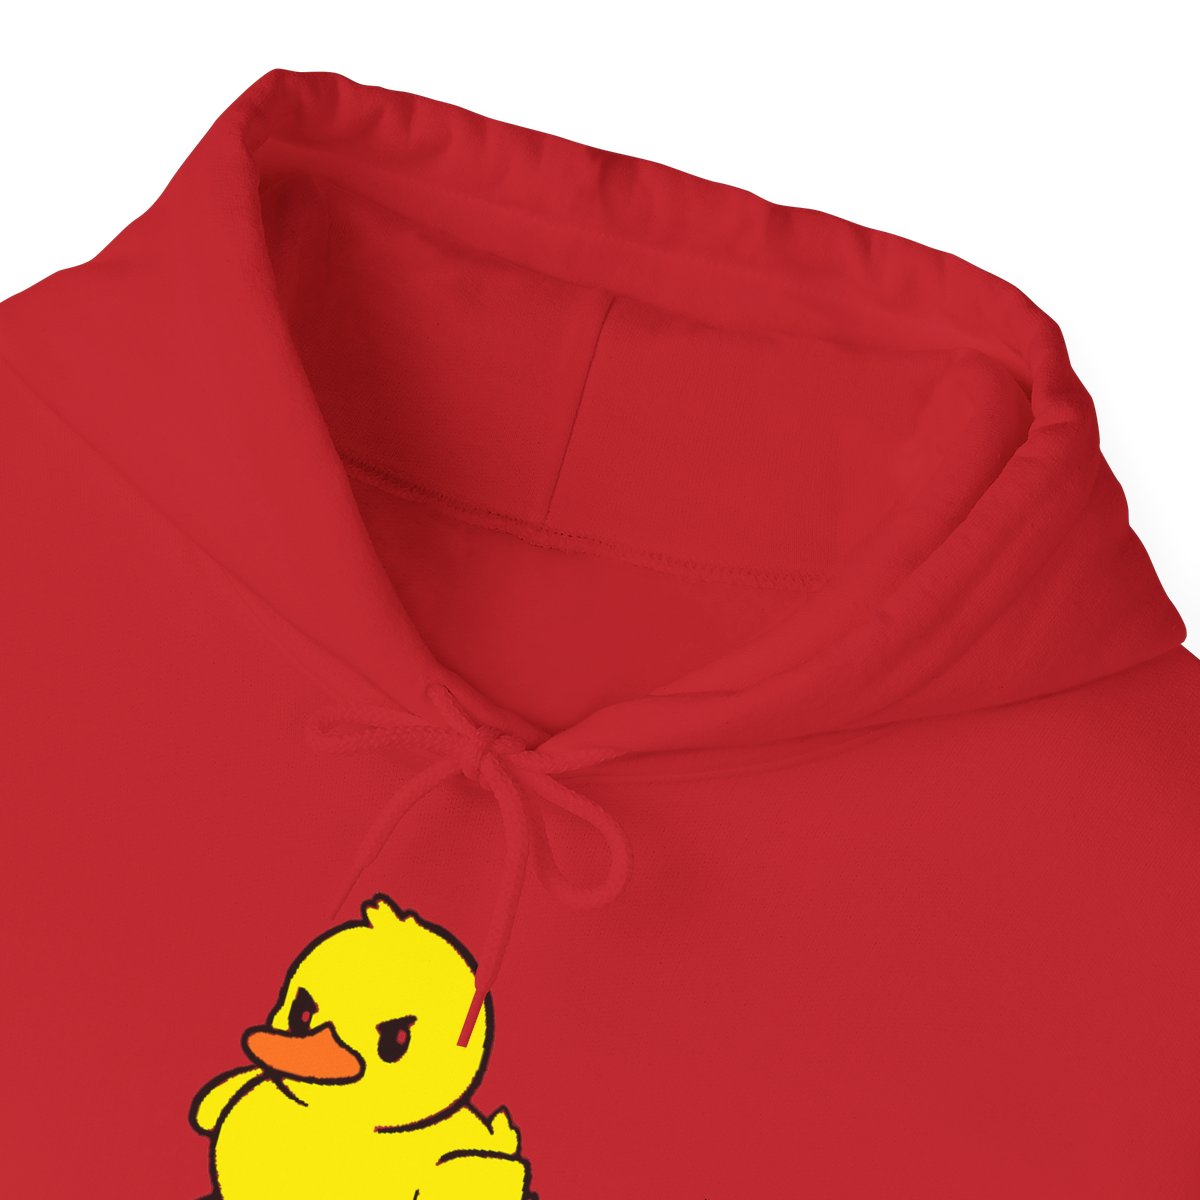 I Don't Give a Duck Hooded Sweatshirt product thumbnail image